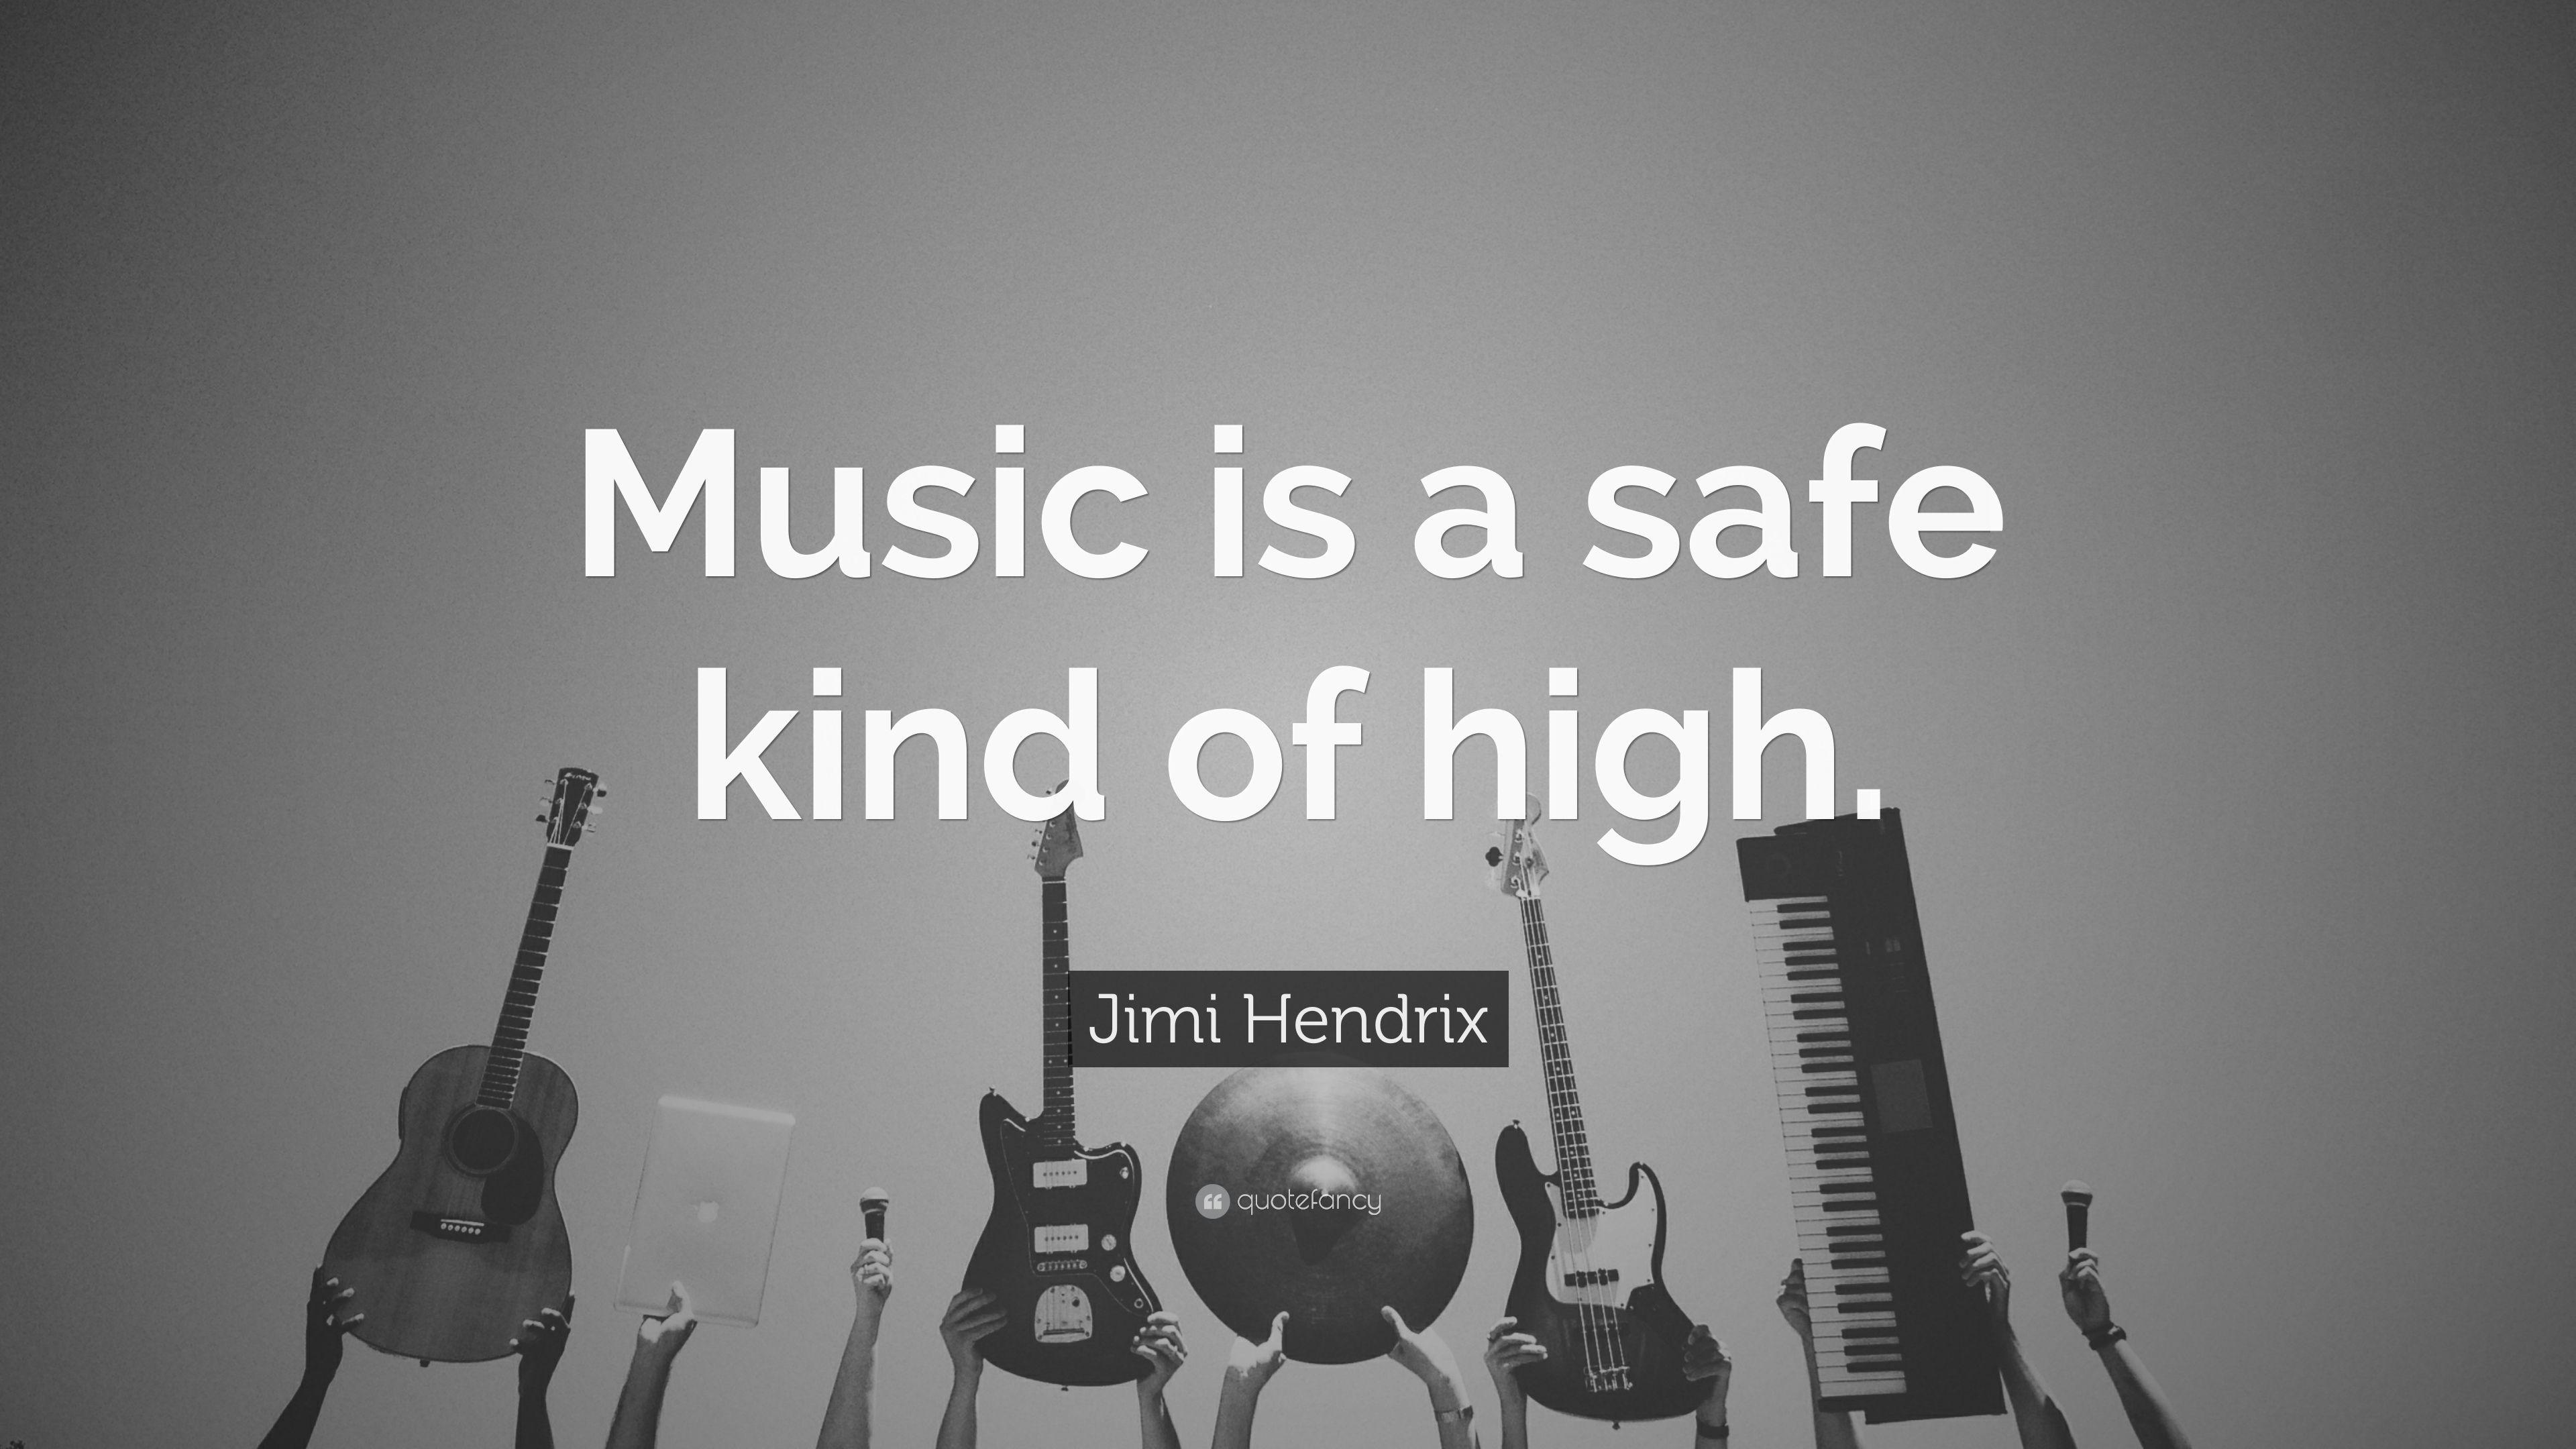 Jimi Hendrix Quote: “Music is a safe kind of high.” 16 wallpaper